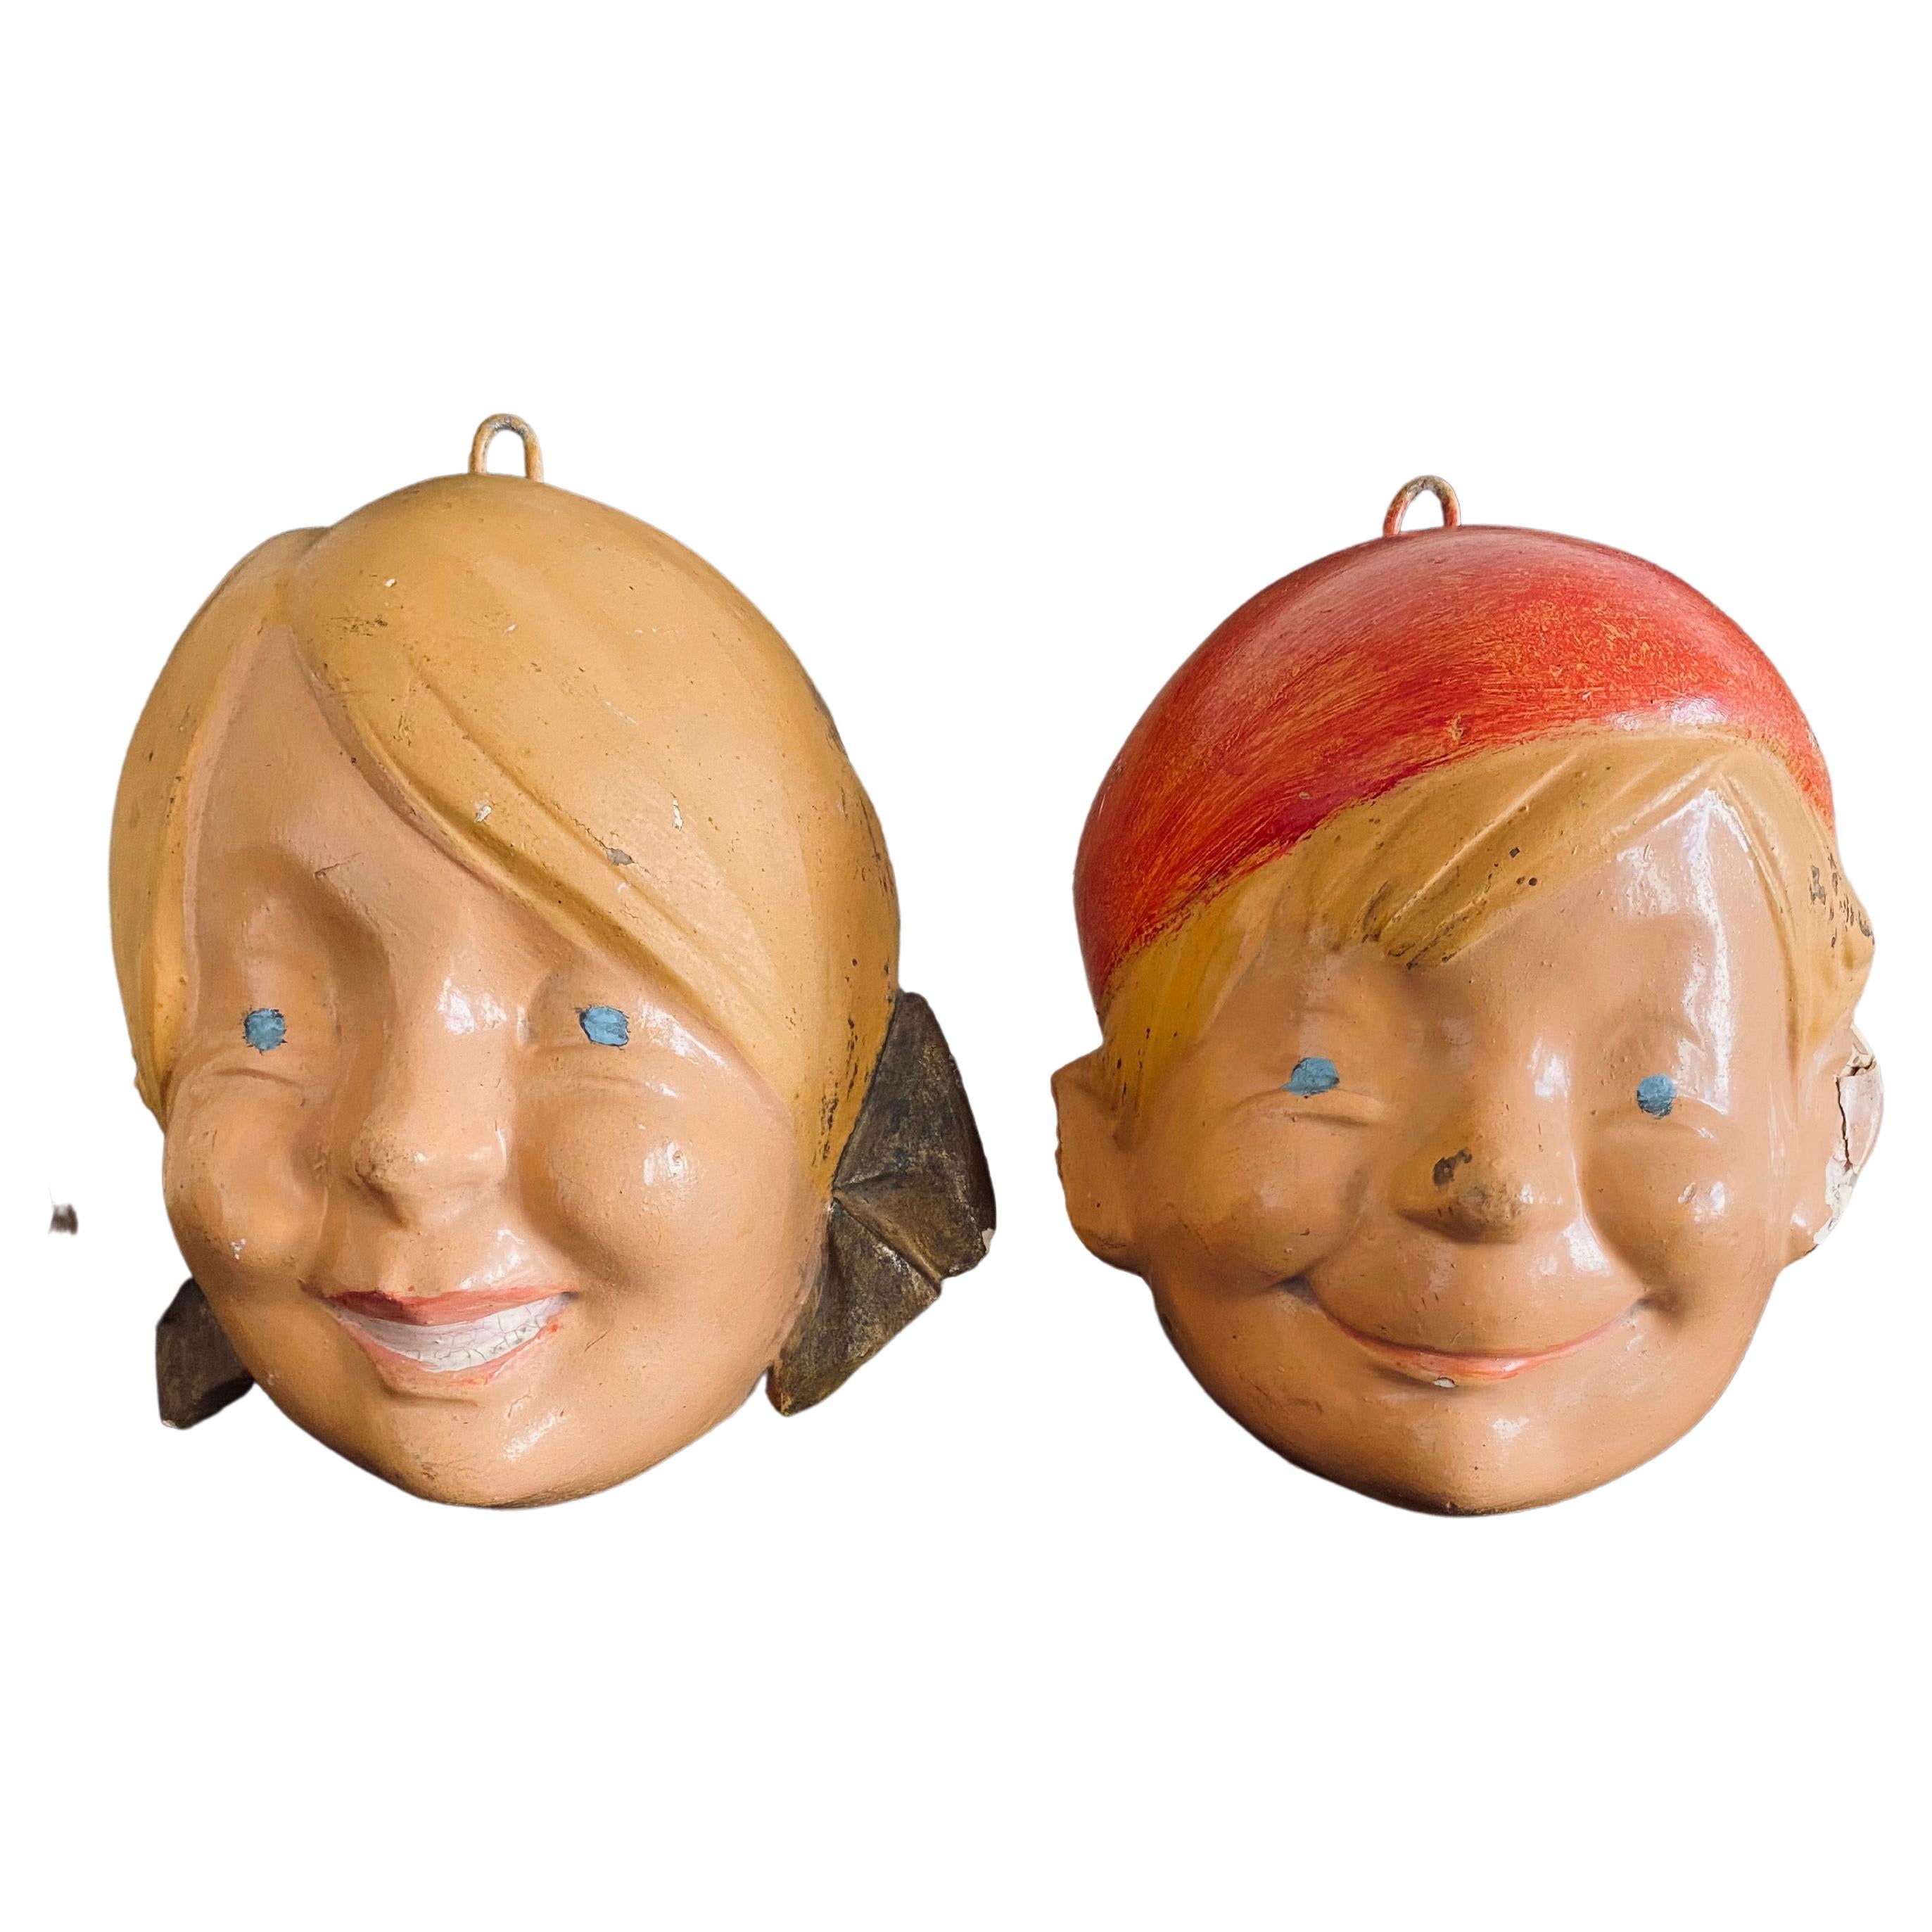 Wall Decoration for the Children's Room in the Form of Children's Masks